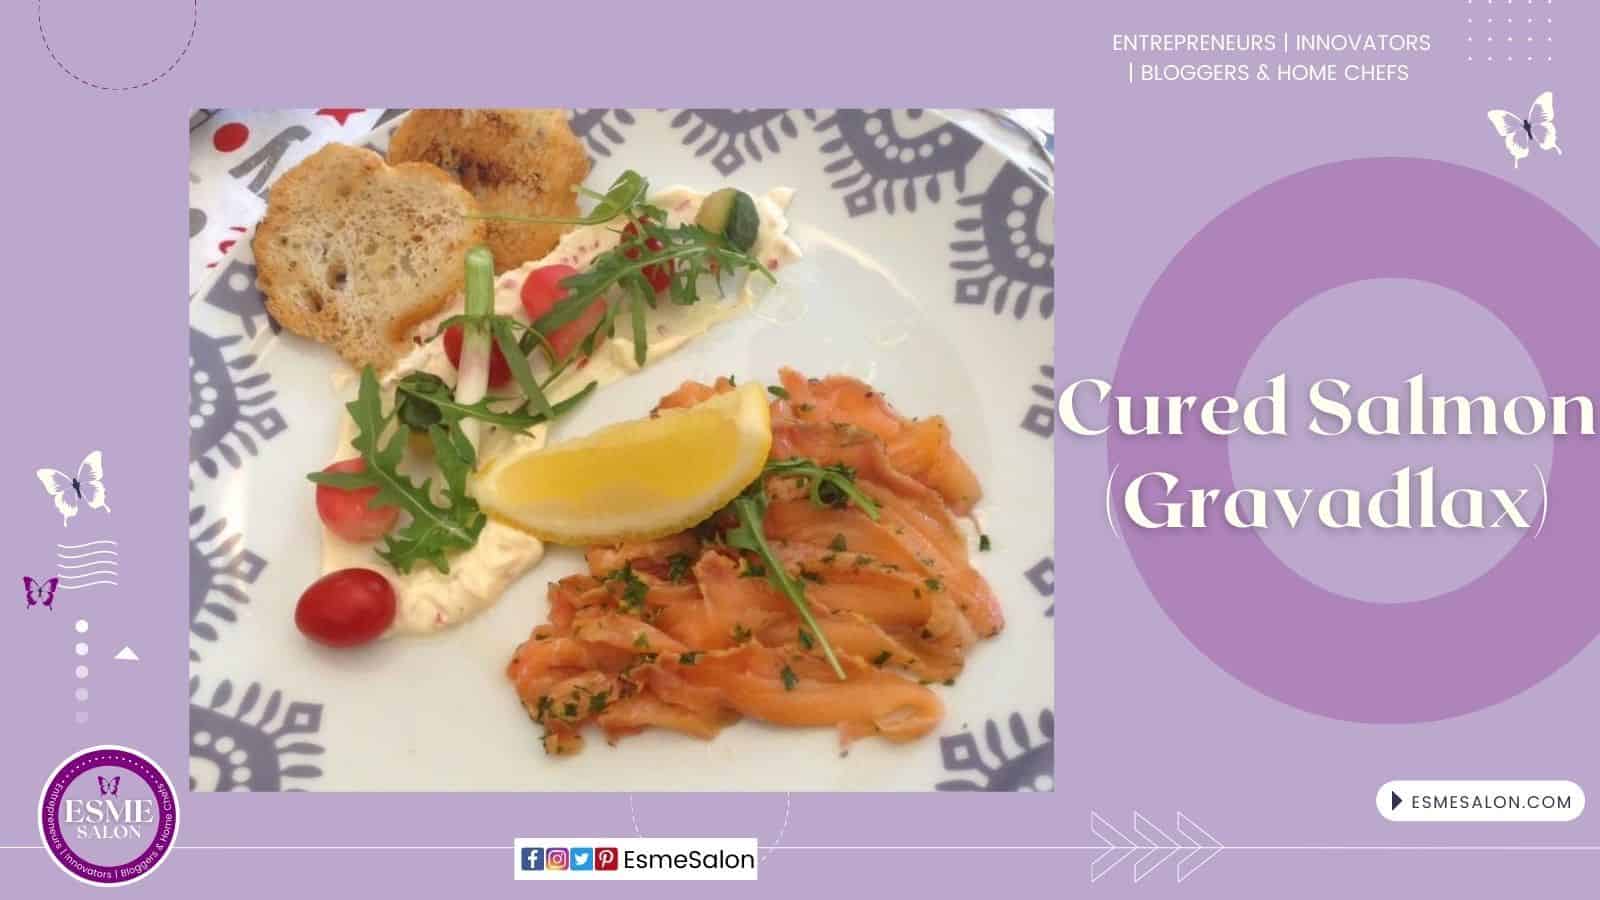 an image of Cured Salmon (Gravadlax) on a white plate with greens and tomato and some bread